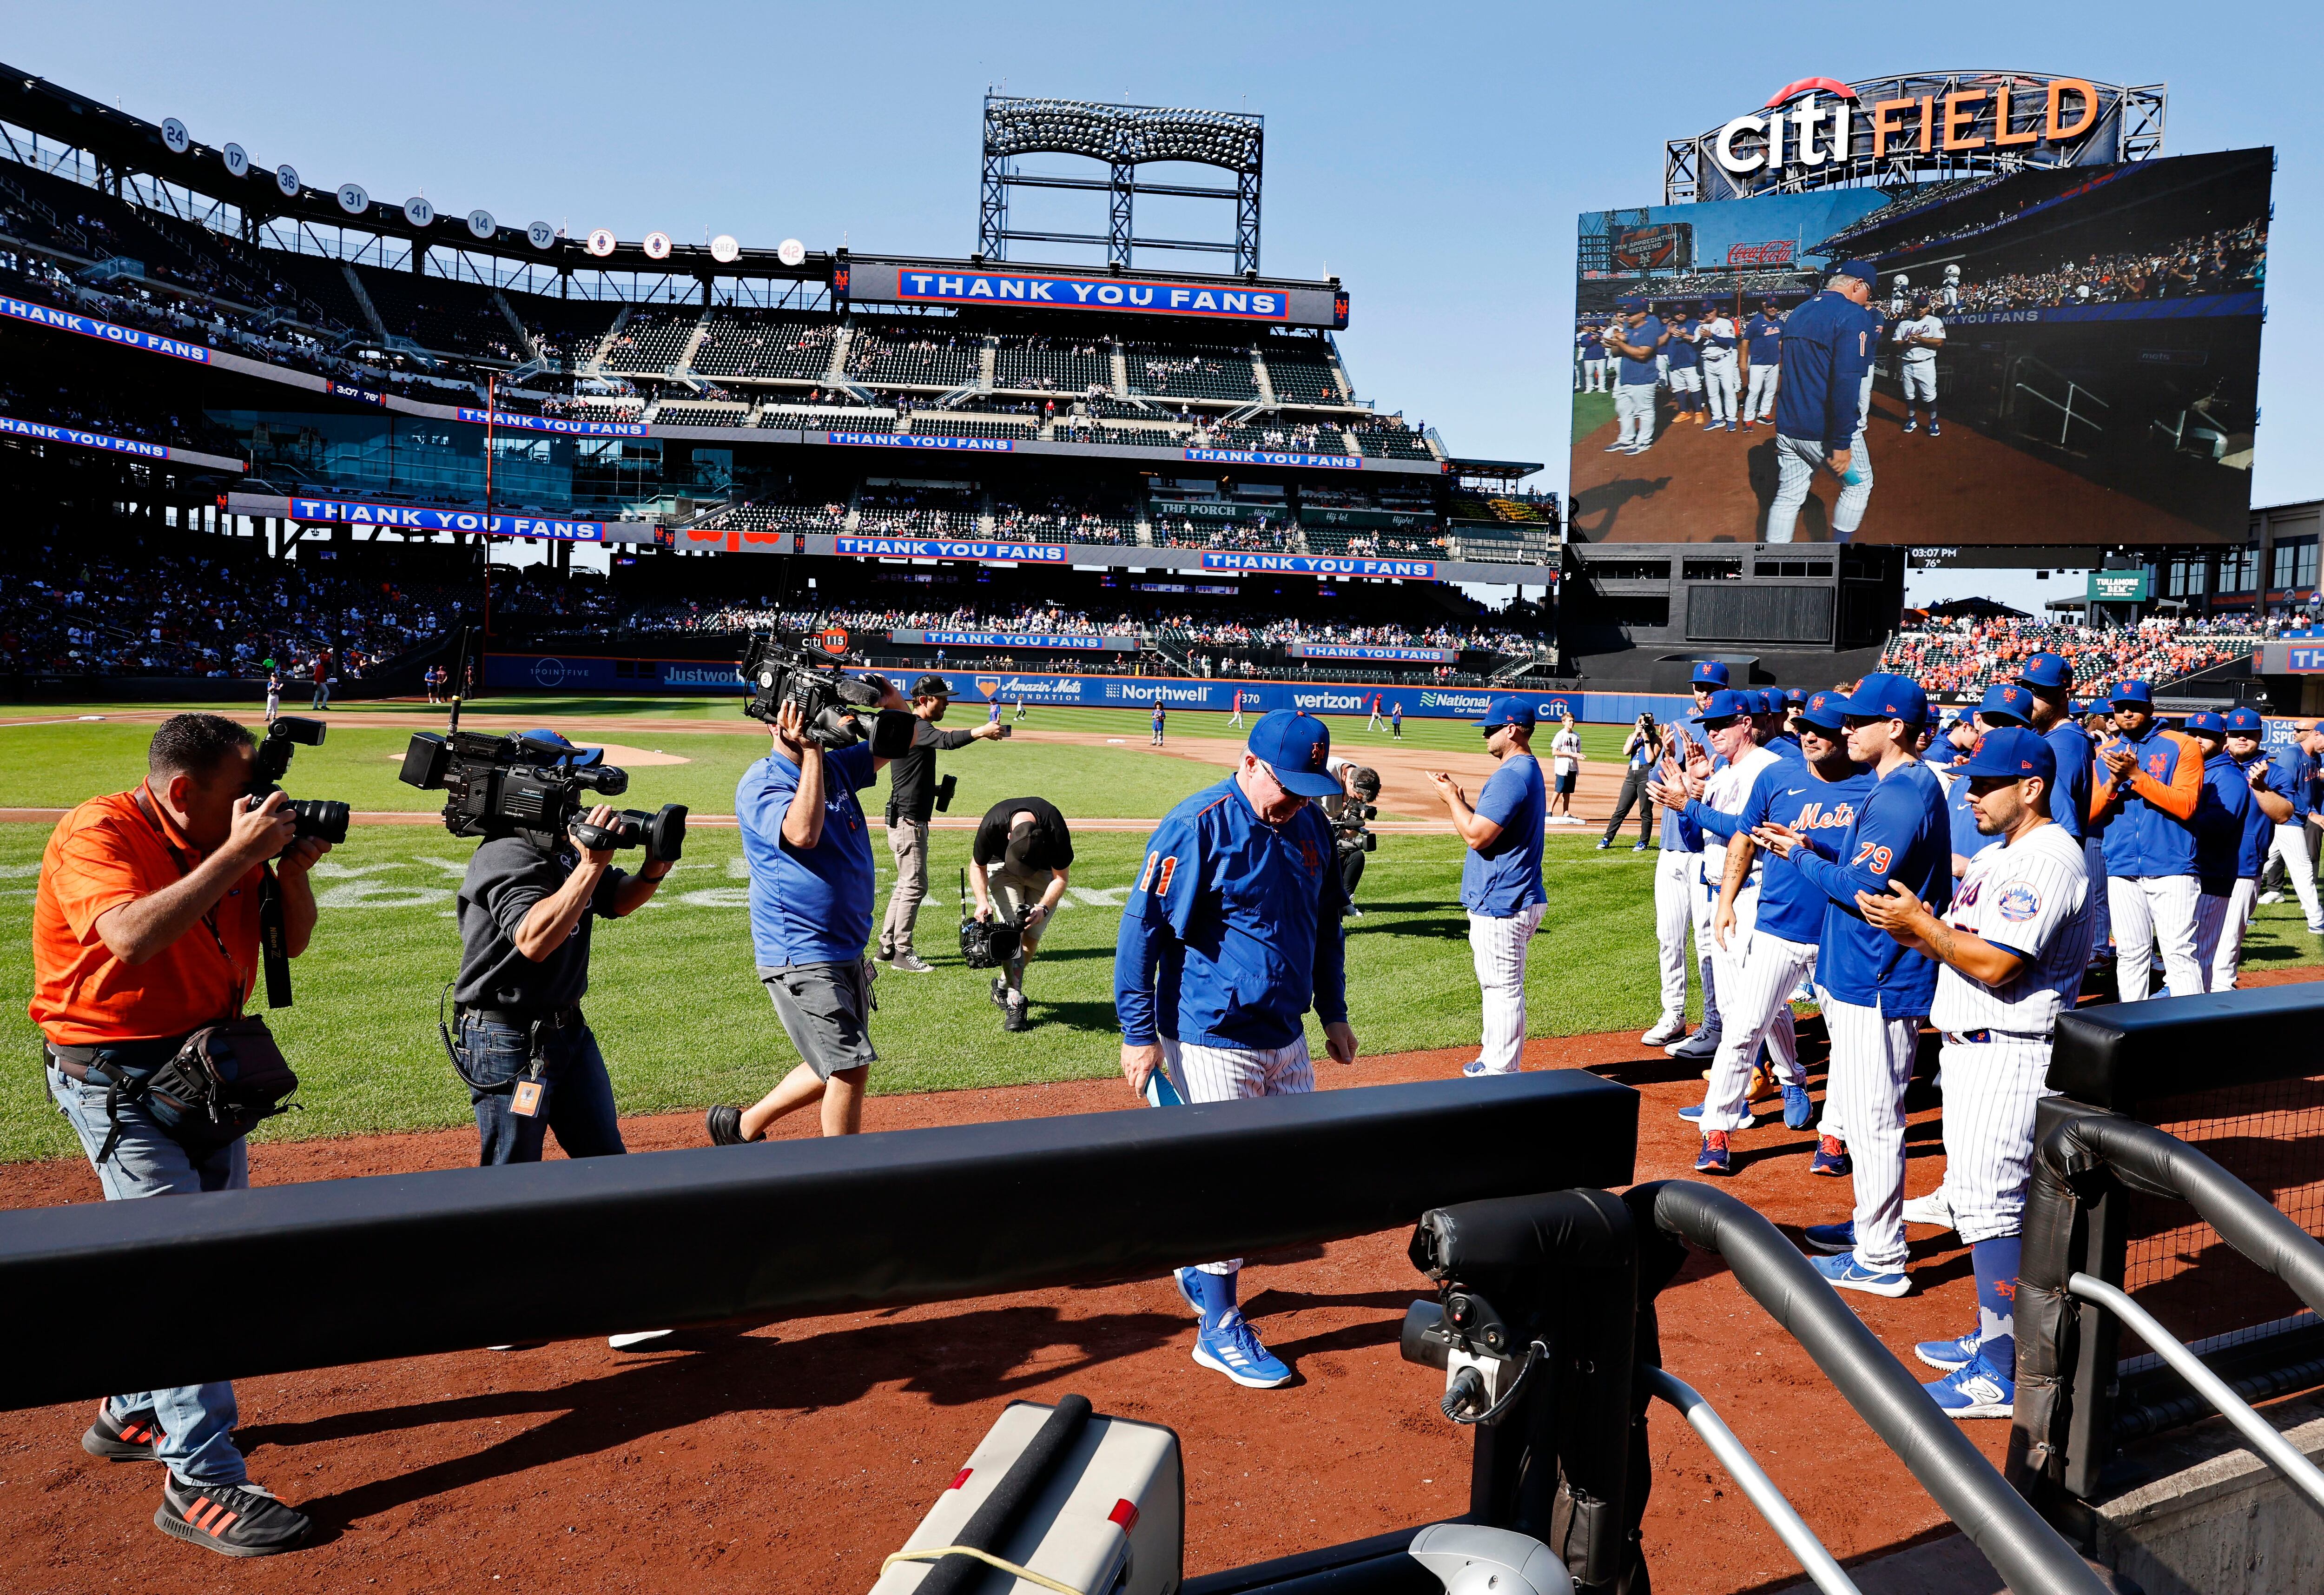 Mets to wear black for Friday's playoff opener at Citi Field: report